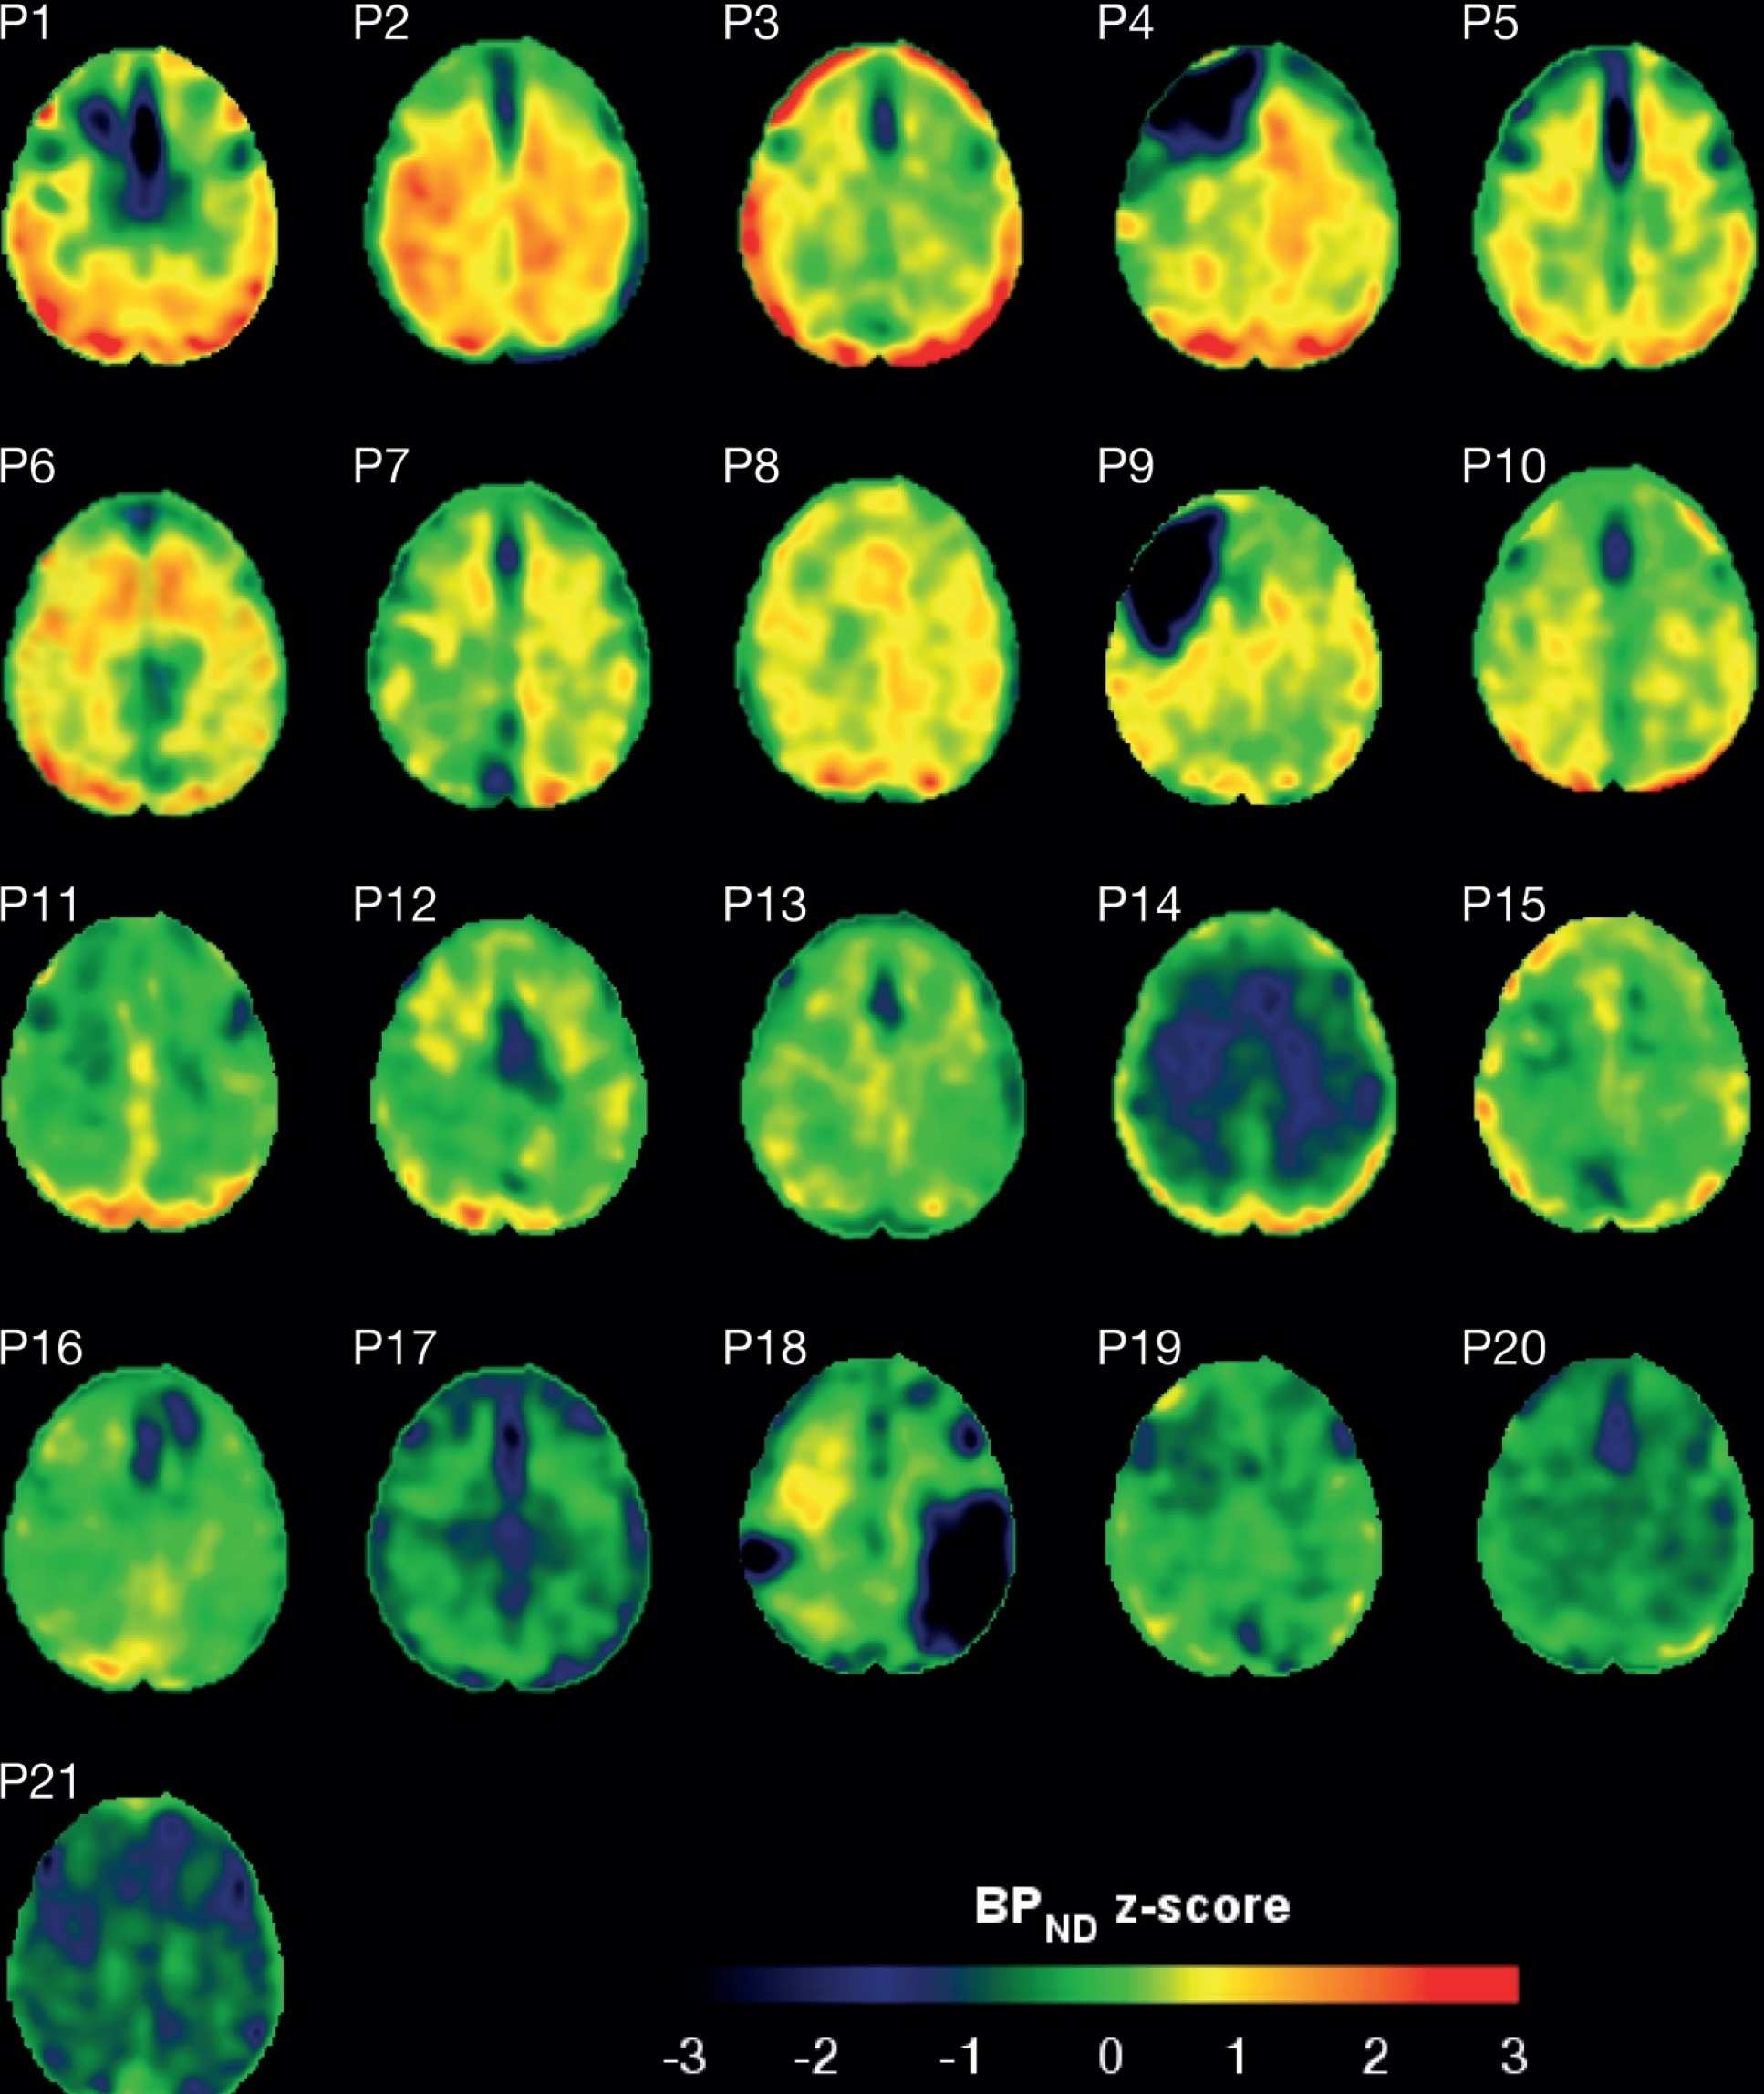 These scans show the amount of tau protein in the brains of patients who have suffered a traumatic brain injury. Red represents increased tau accumulation